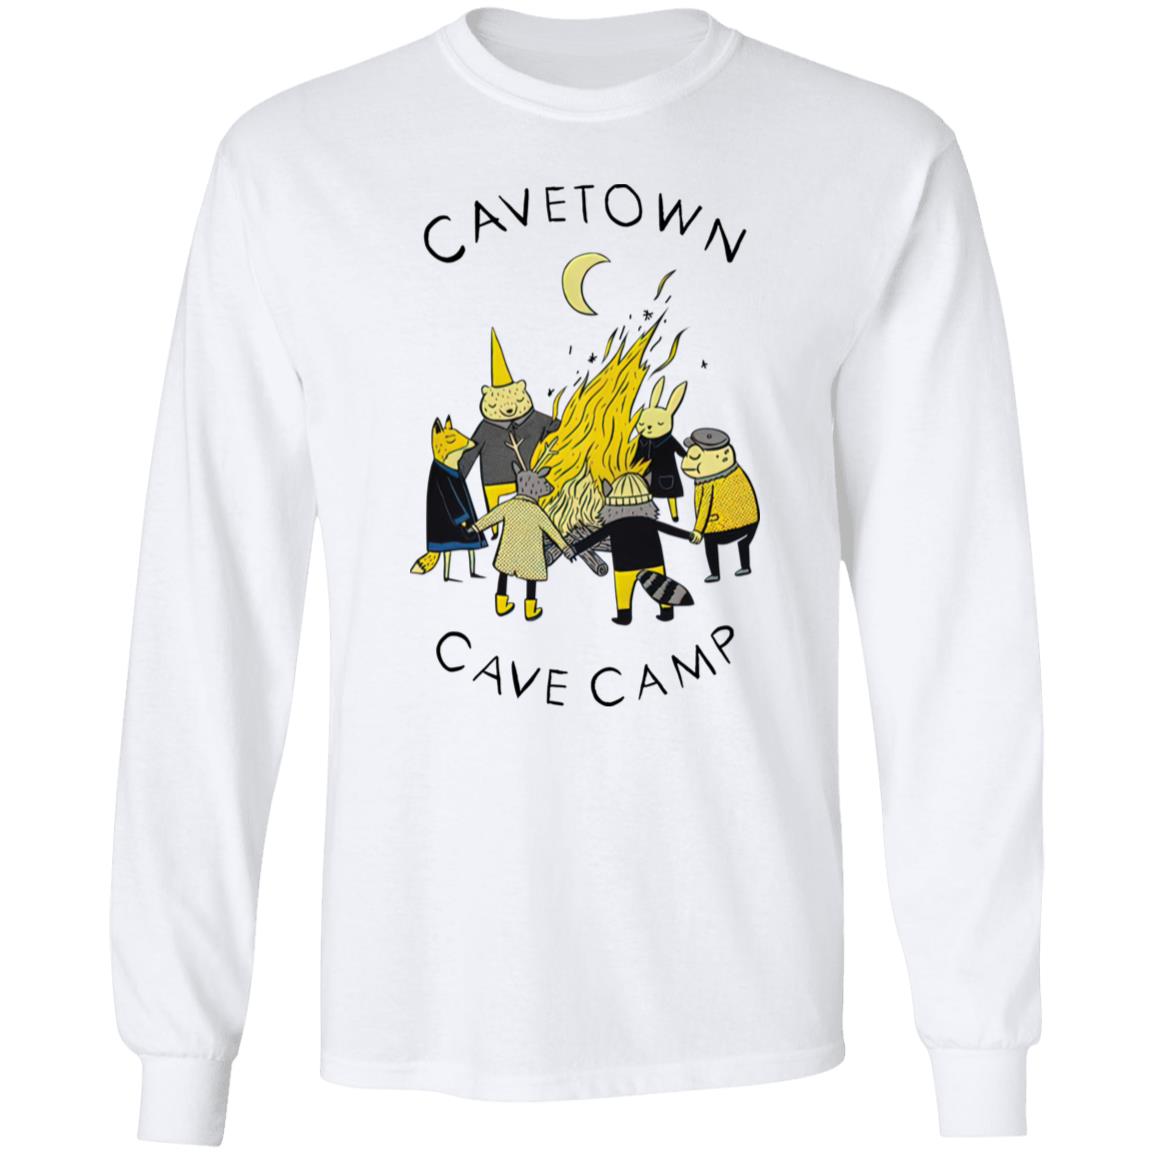 Step into the Musical World of Cavetown with Official Merch